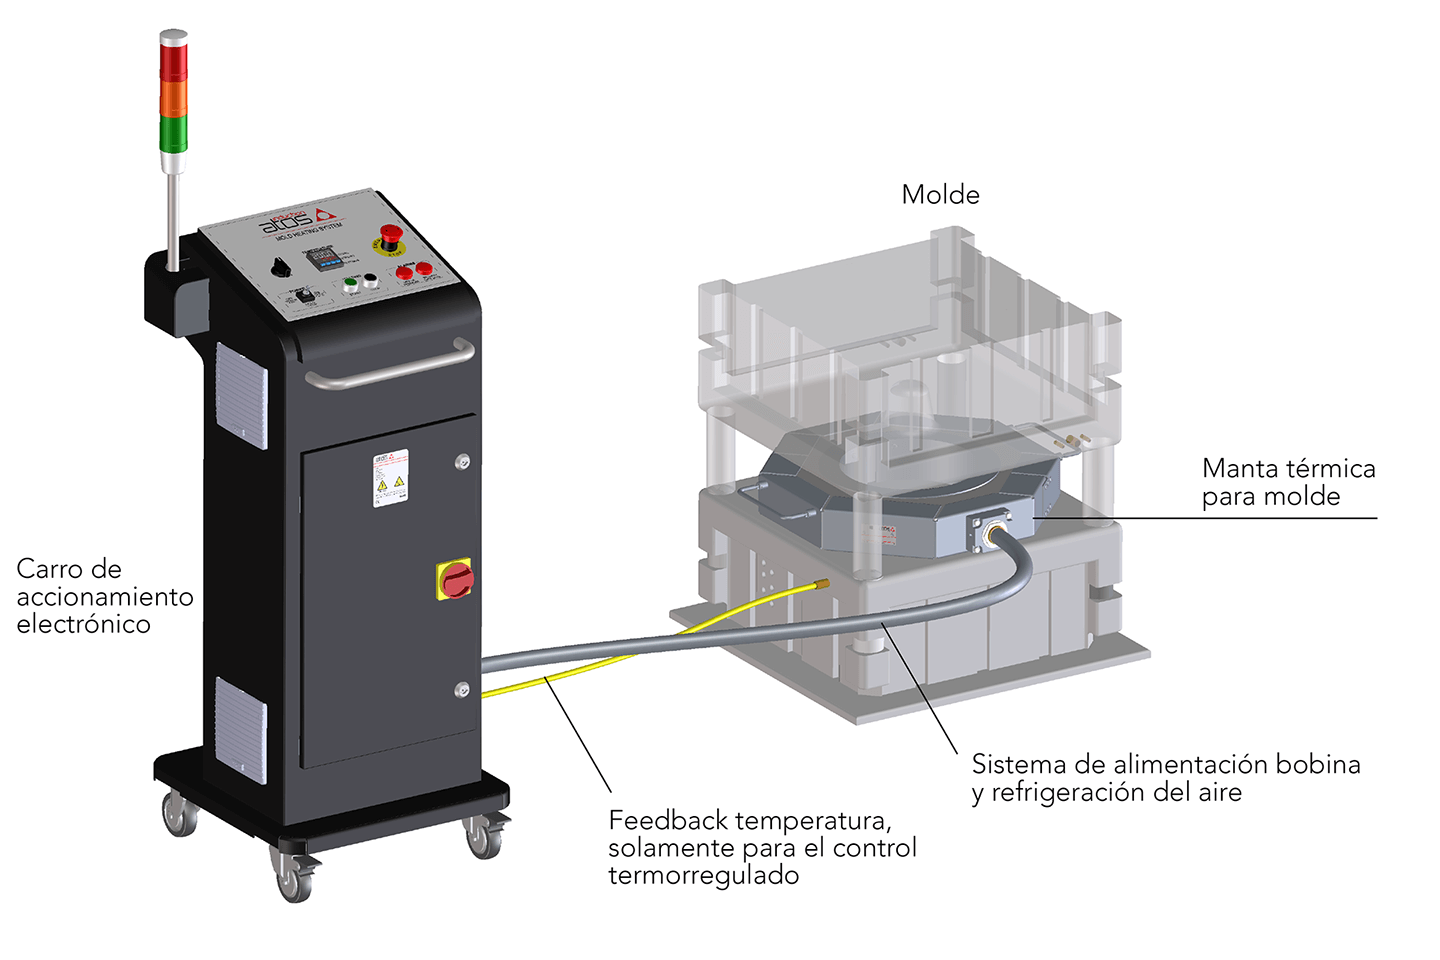 The Atos Induction molds preheating system